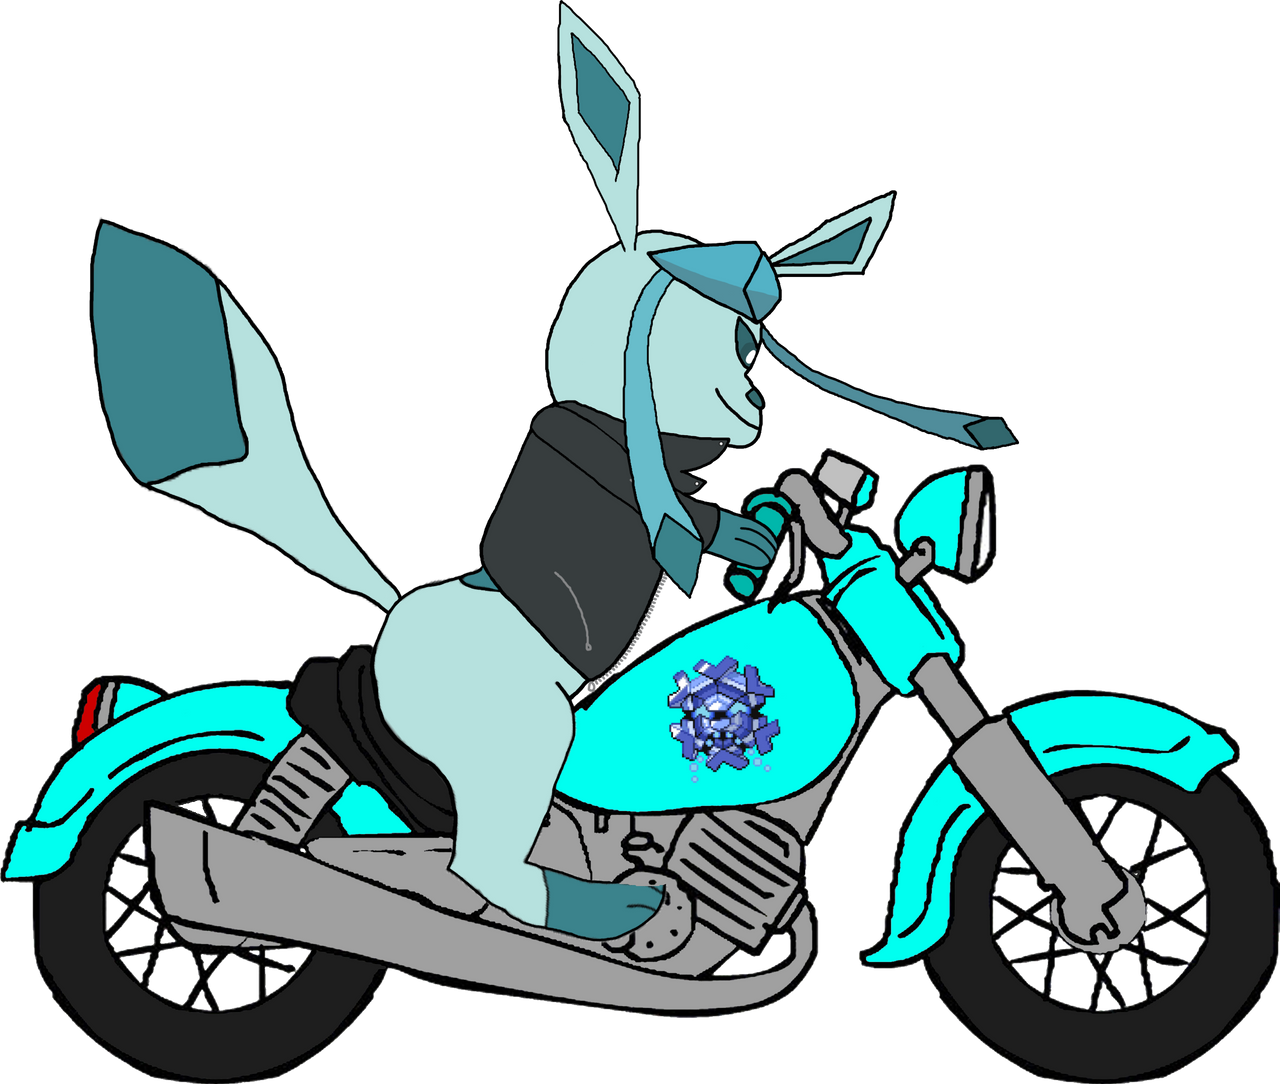 glaceon_on_a_motorcycle_by_cartoonfanboy1991_deqdel4-fullview.png